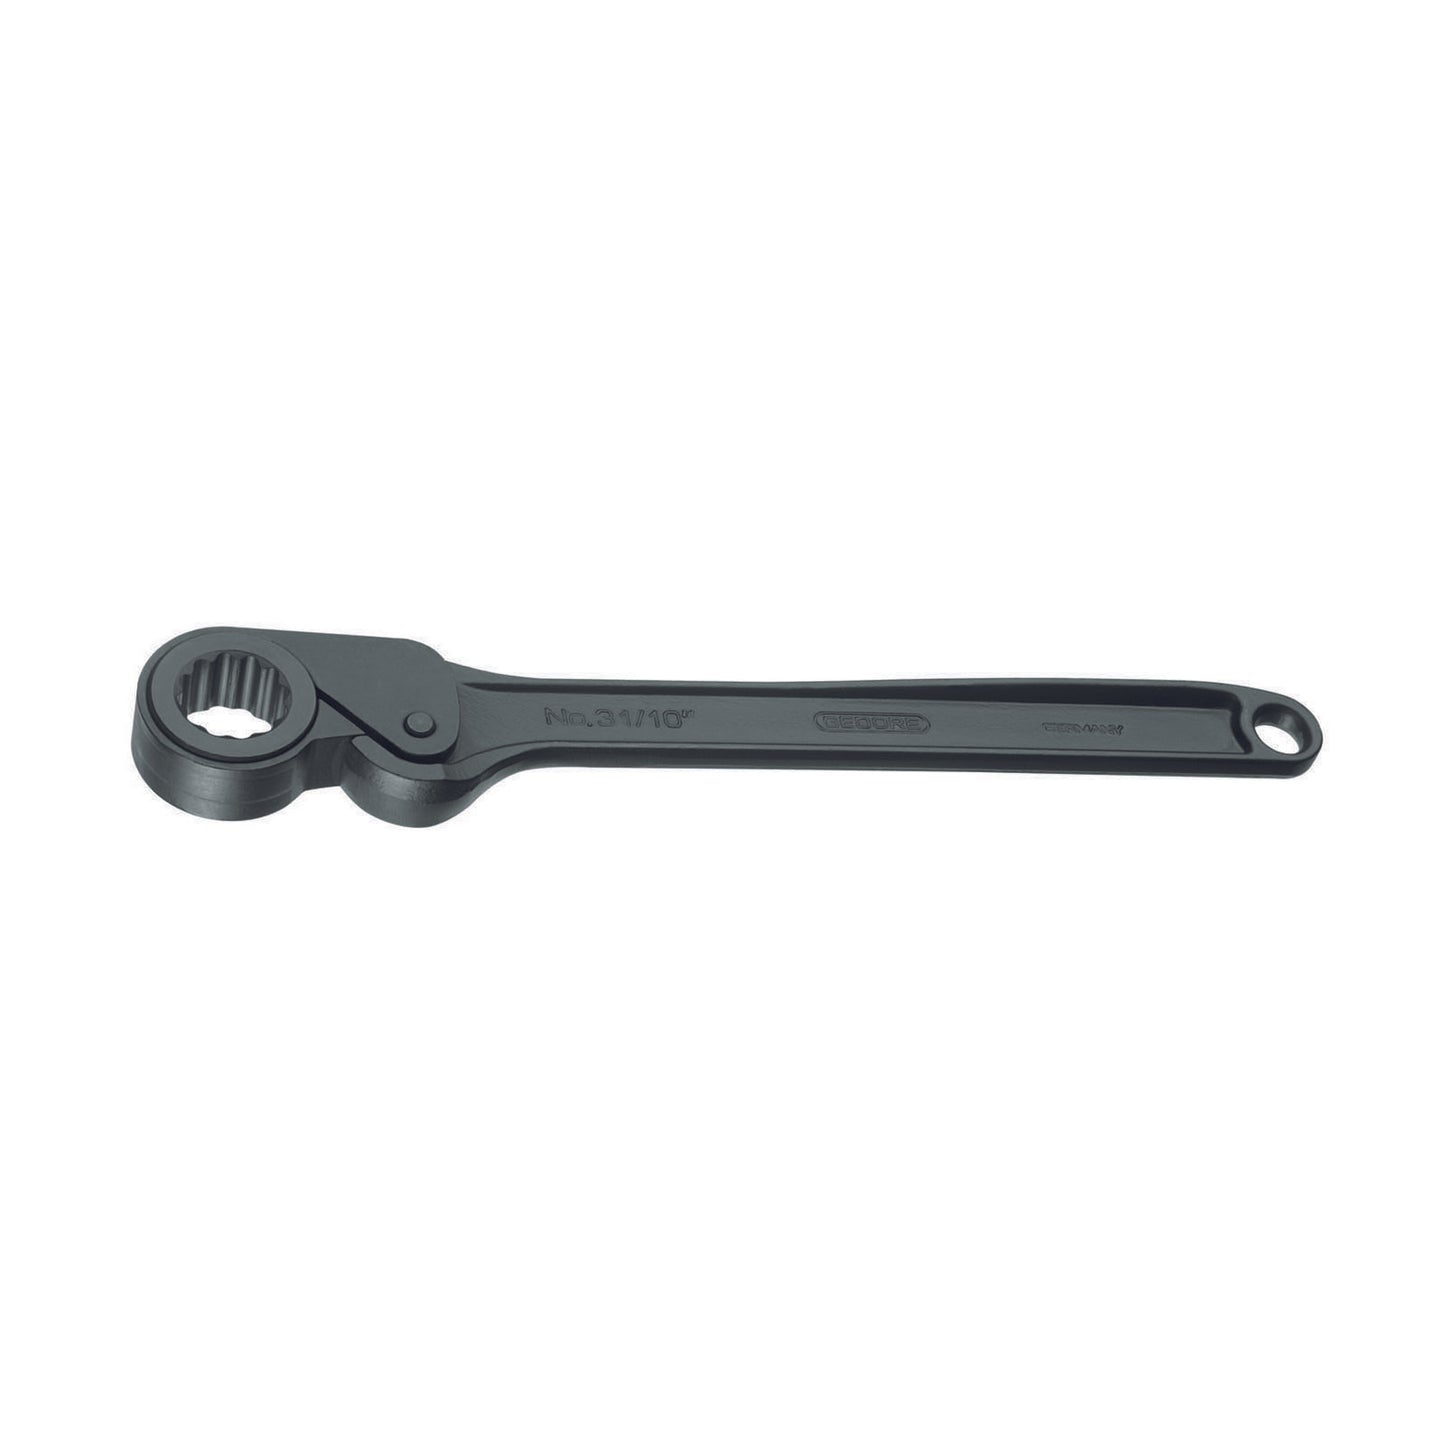 GEDORE 31 KR 12-24 - 12" ratchet with 24 mm ring (6254850)